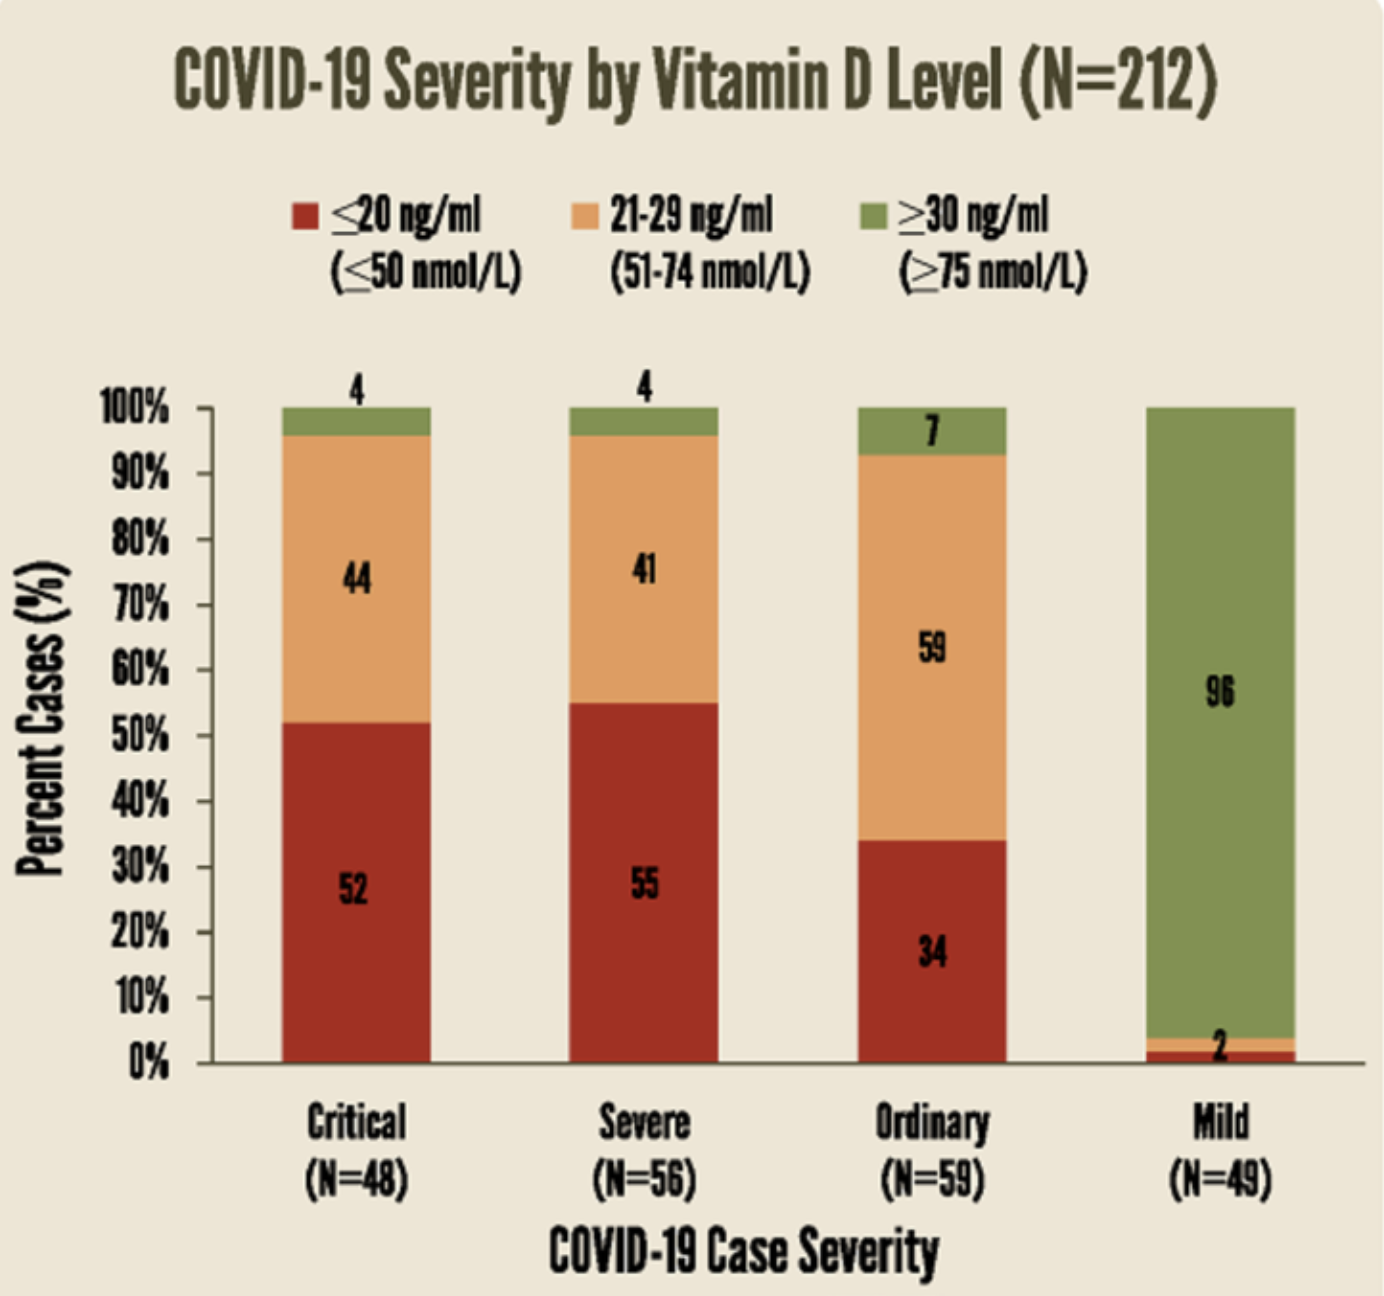 The link between the severity of COVID-19 and levels of vitamin D in a sample of 212 cases. In the 48 critical cases and the 56 severe cases, only 4% of patients had a normal vitamin D level of 30 ng/ml or above. On the other hand, in the 49 mild cases, 96% of the patients had a normal vitamin D level of 30 ng/ml or above.

Source: Grassroots Health